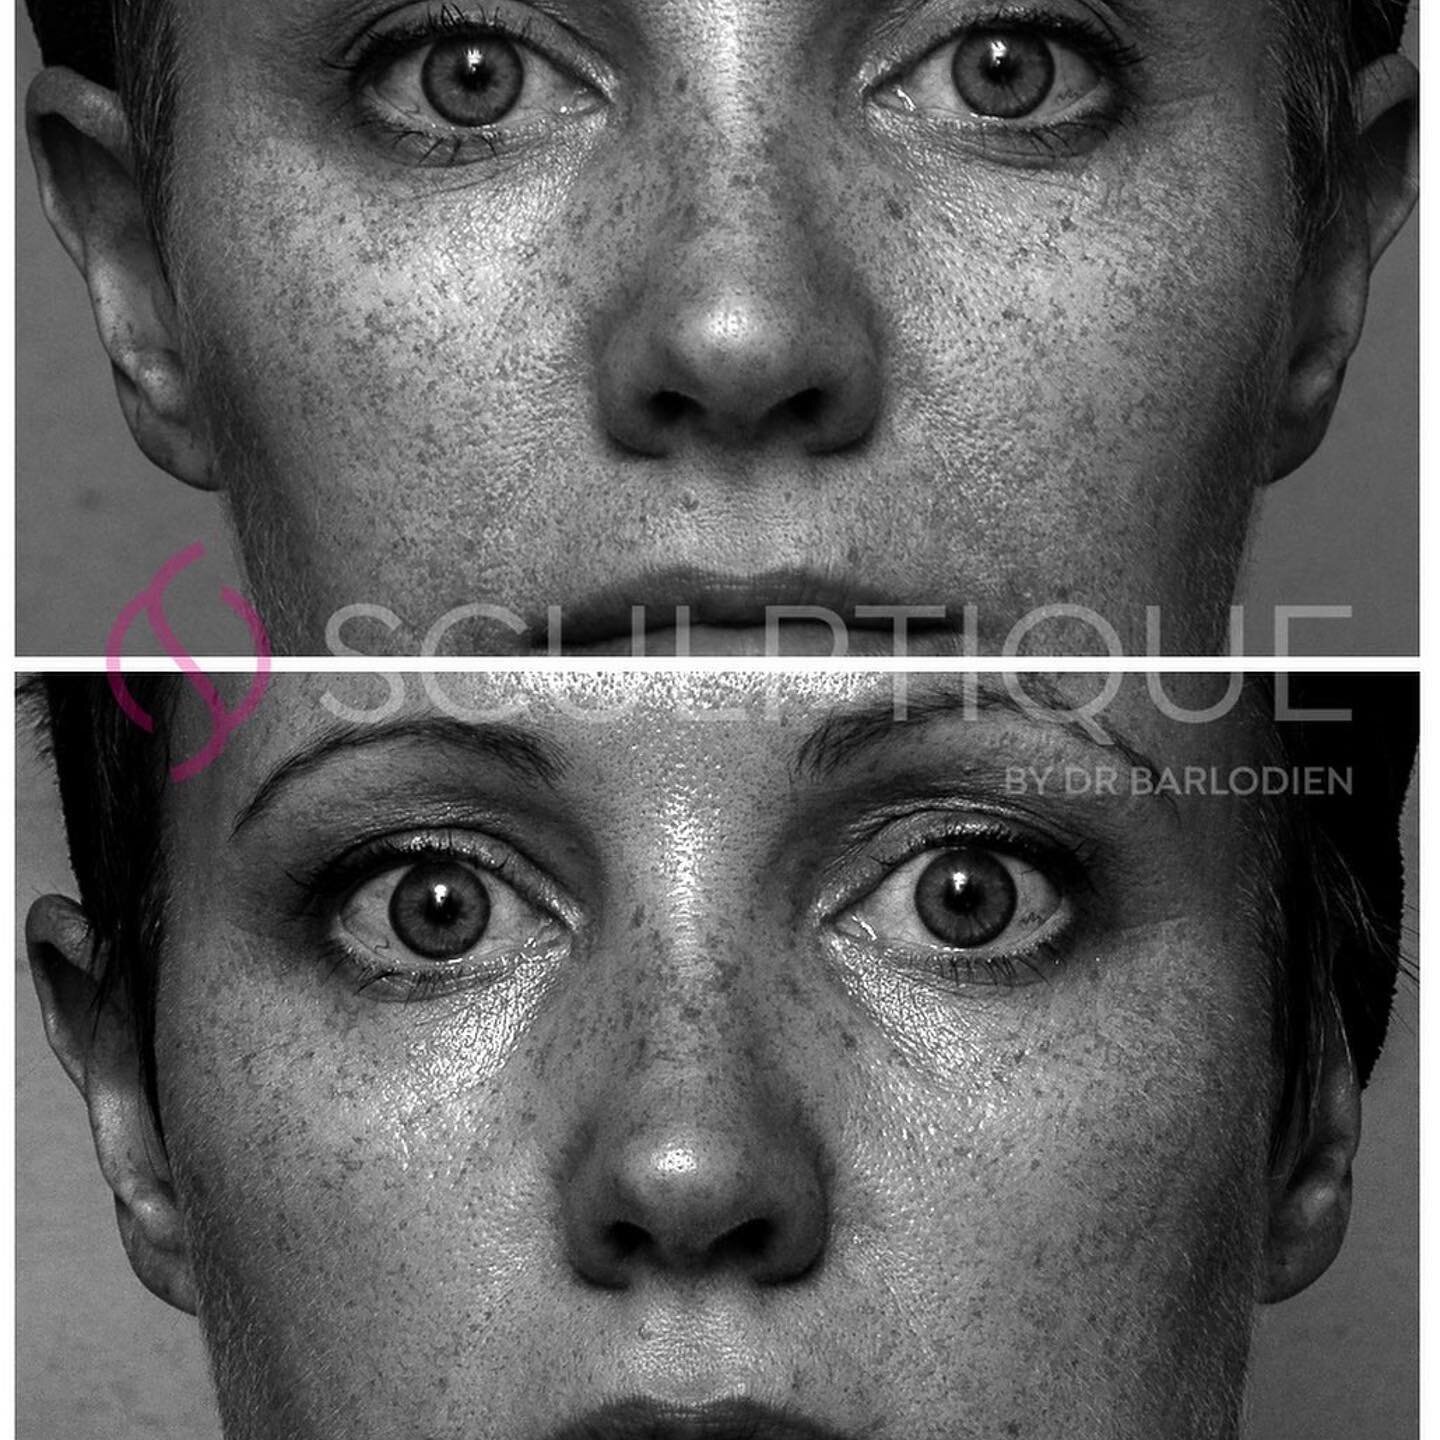 #repost @drbarlodien
・・・
2020 was rough in many aspects but at least I did not let that be the story of my skin.
The first photo was taken in February 2020 when I installed my Clinical Imaging system.
The second was in January 2021.  I used a melanin